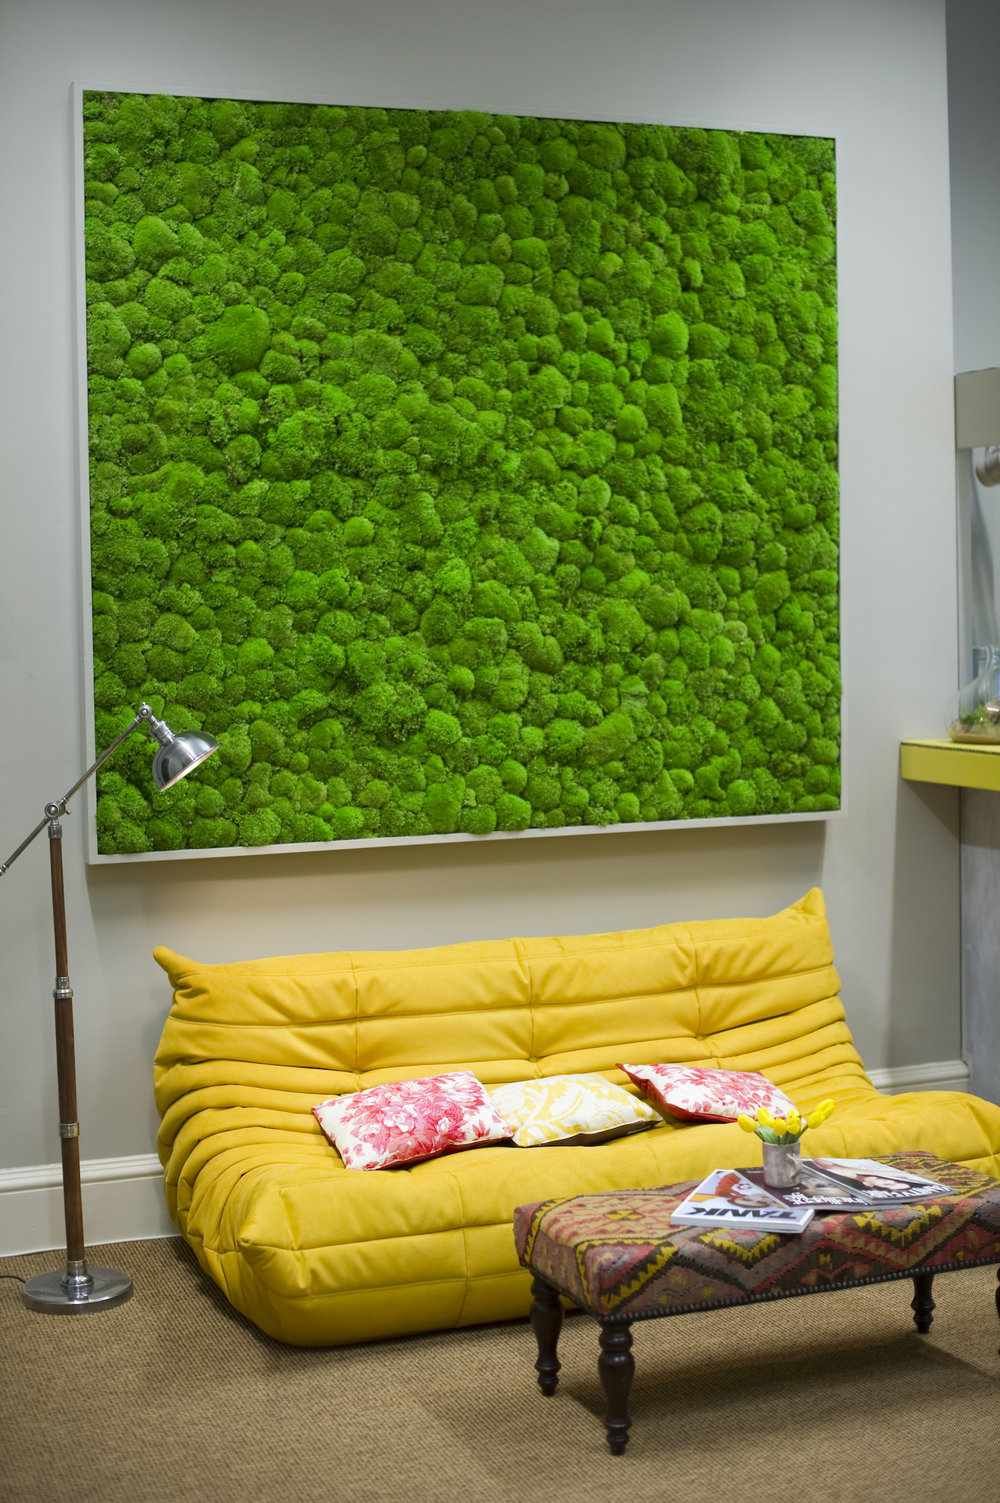 17 Beautiful Moss Wall Ideas For Your Home With Regard To California Living Wall Art (View 9 of 15)